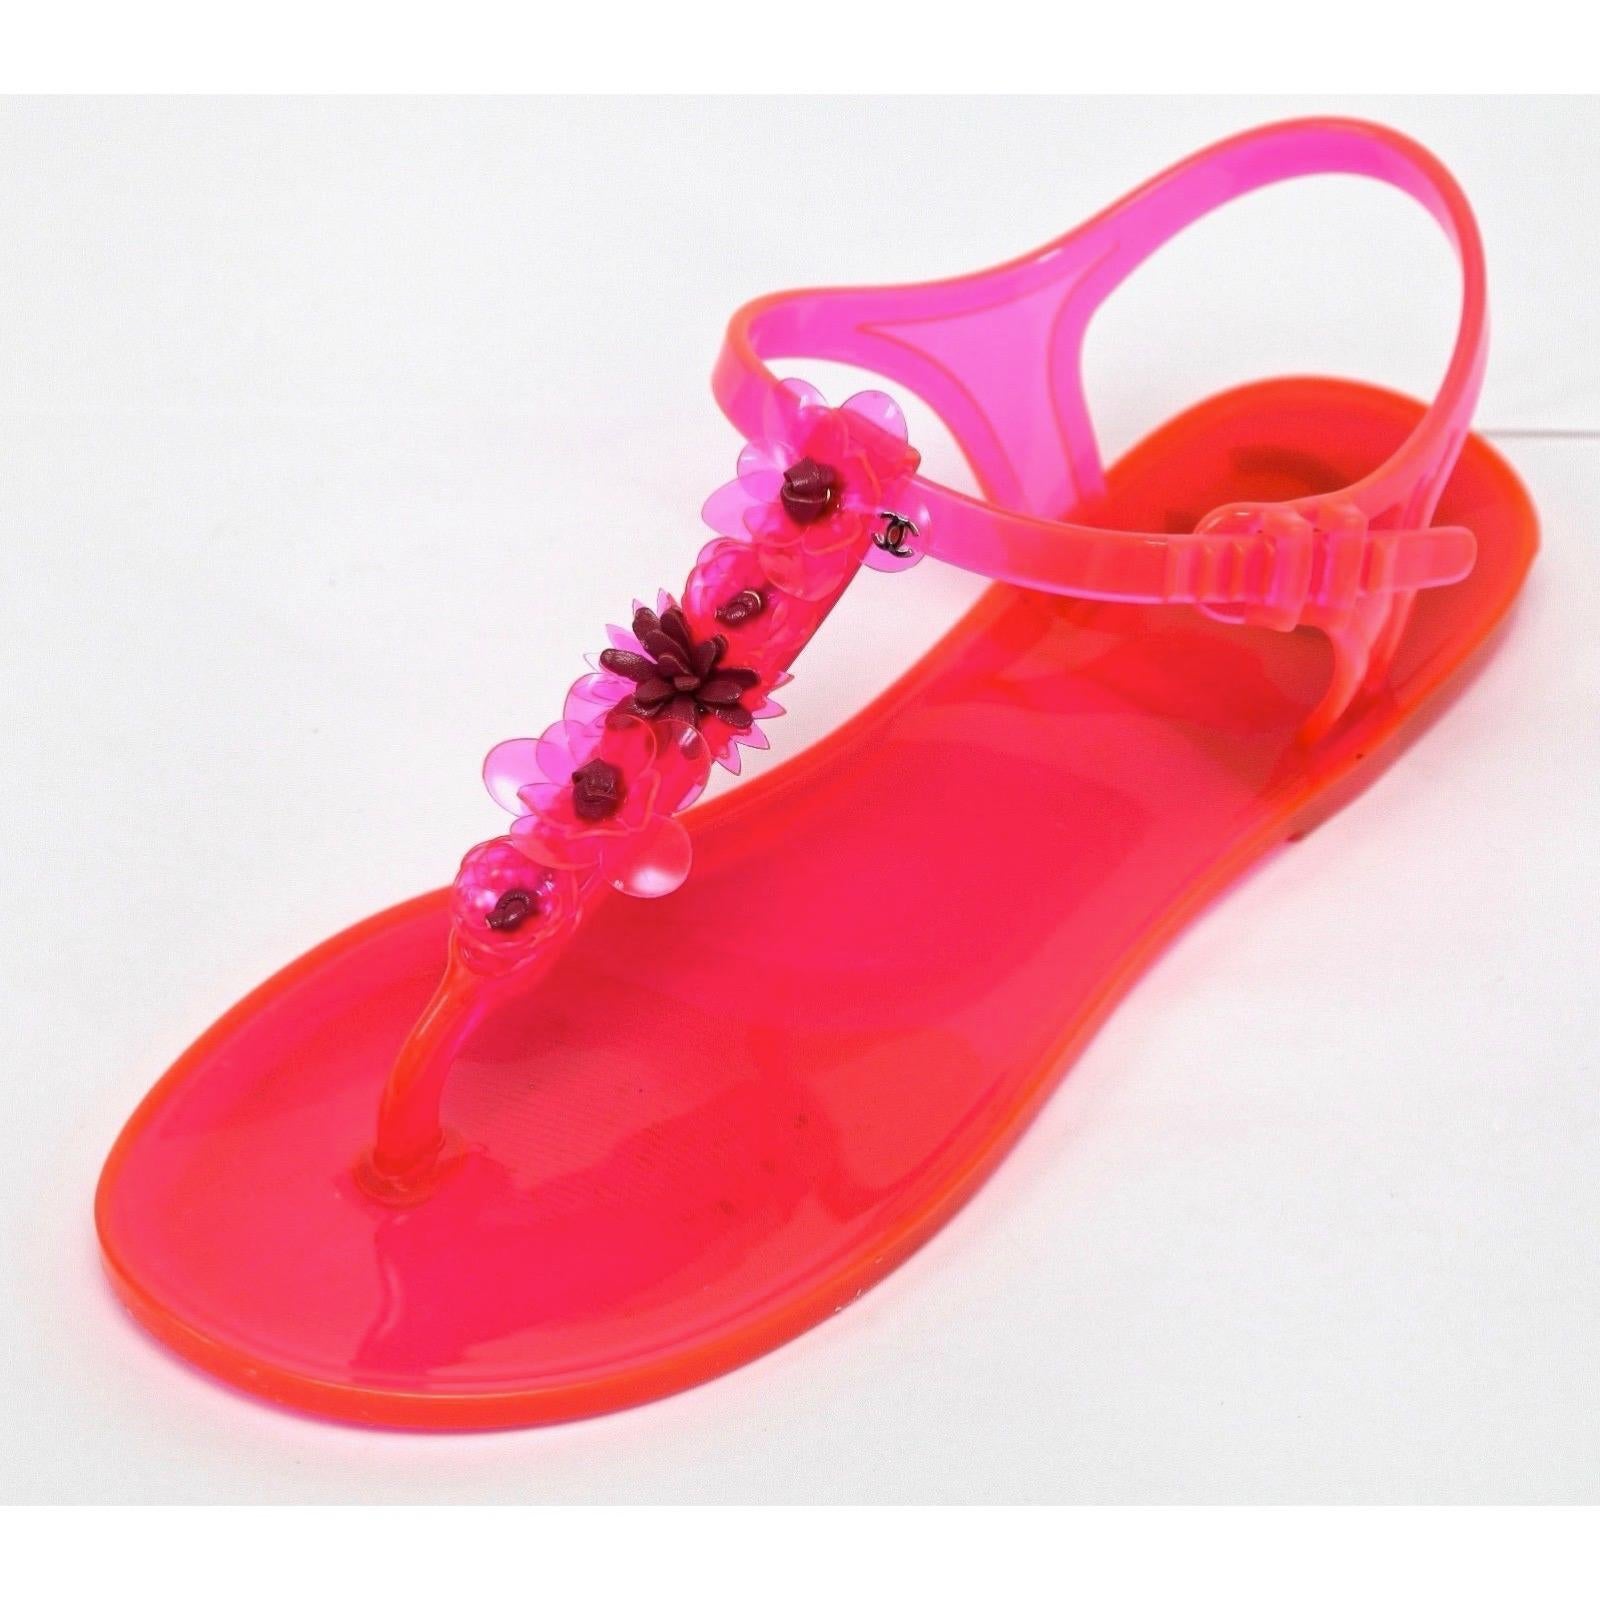 GUARANTEED AUTHENTIC CHANEL CRUISE 2016 PINK CAMELLIA JELLY SANDALS

Retail excluding taxes, $625


Details:
- Pink jelly style thong style sandal, camellia flowers in rubber and leather.
- Ankle strap closure.
- Rubber insole and sole.
- Comes with